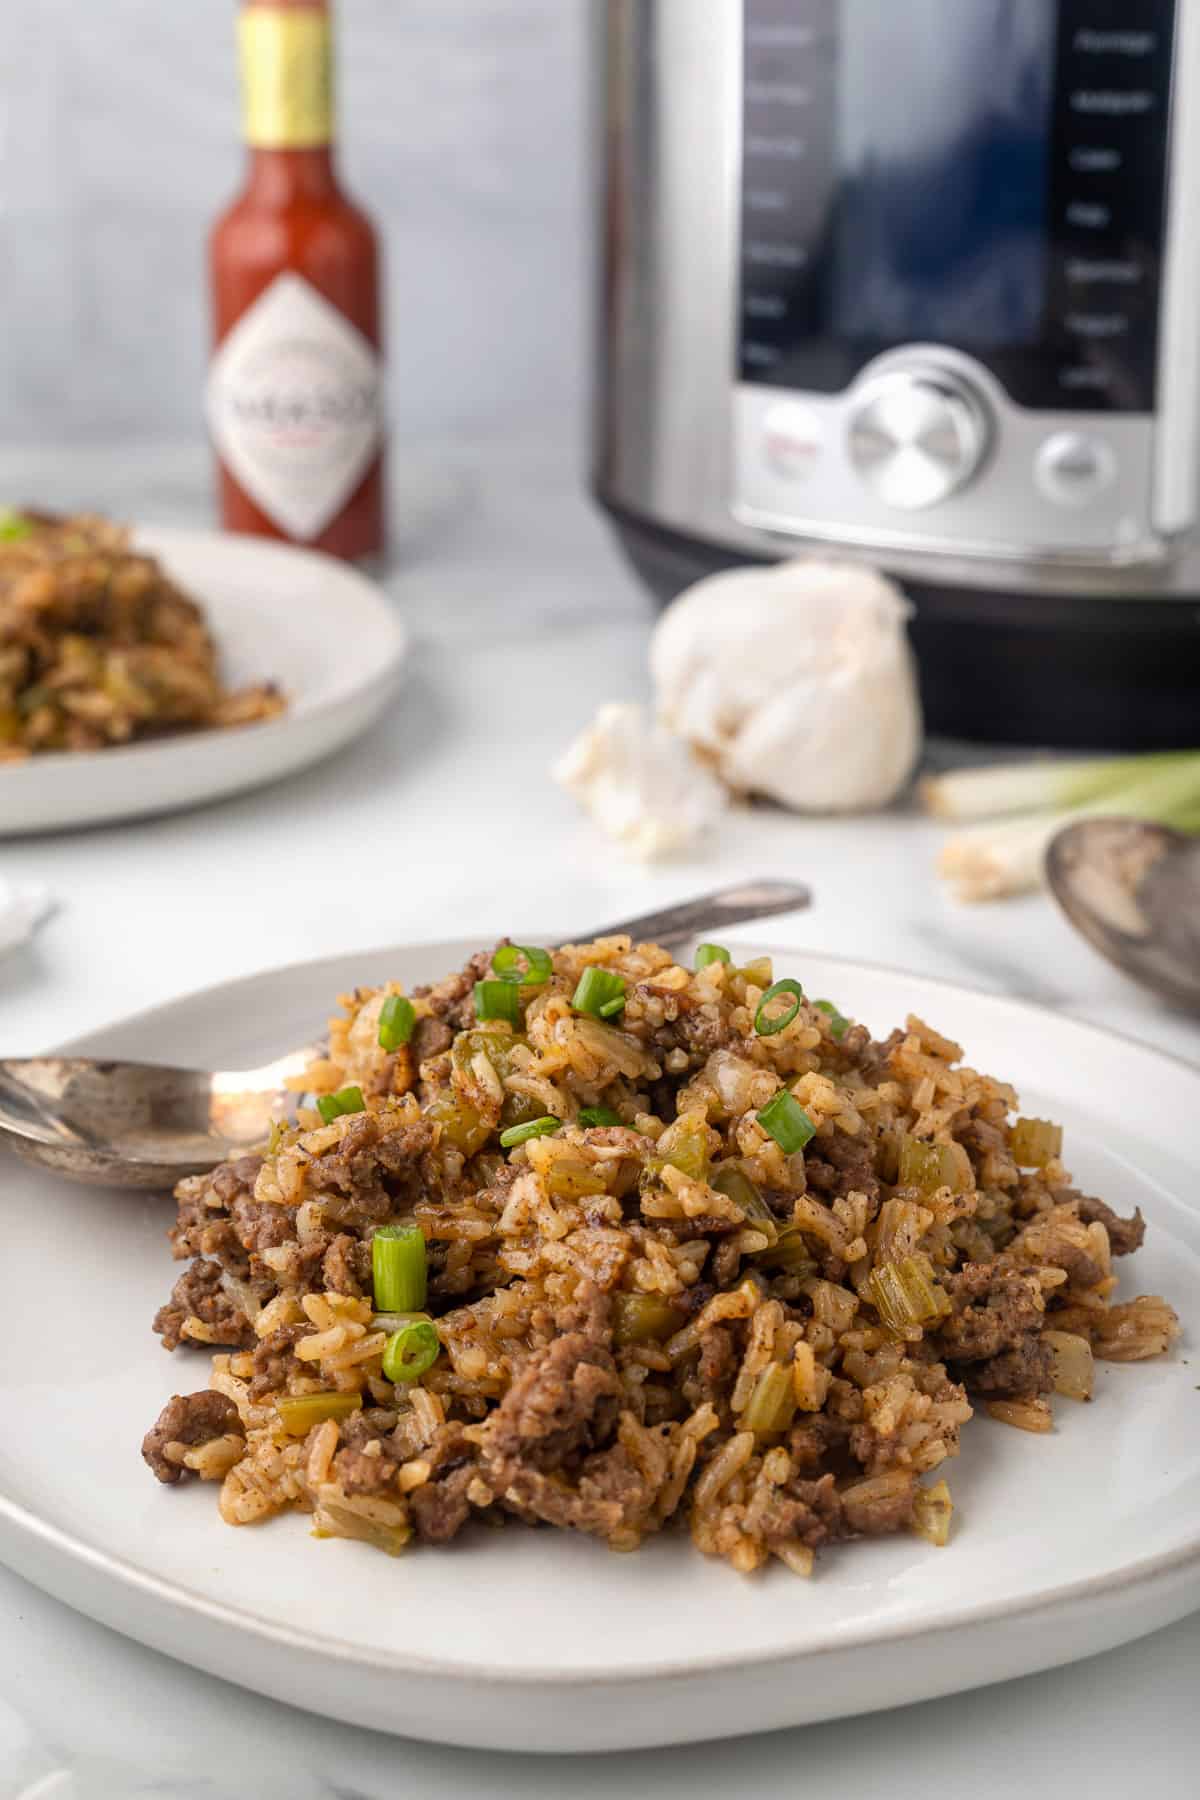 A plate of dirty rice in front of an Instant Pot.